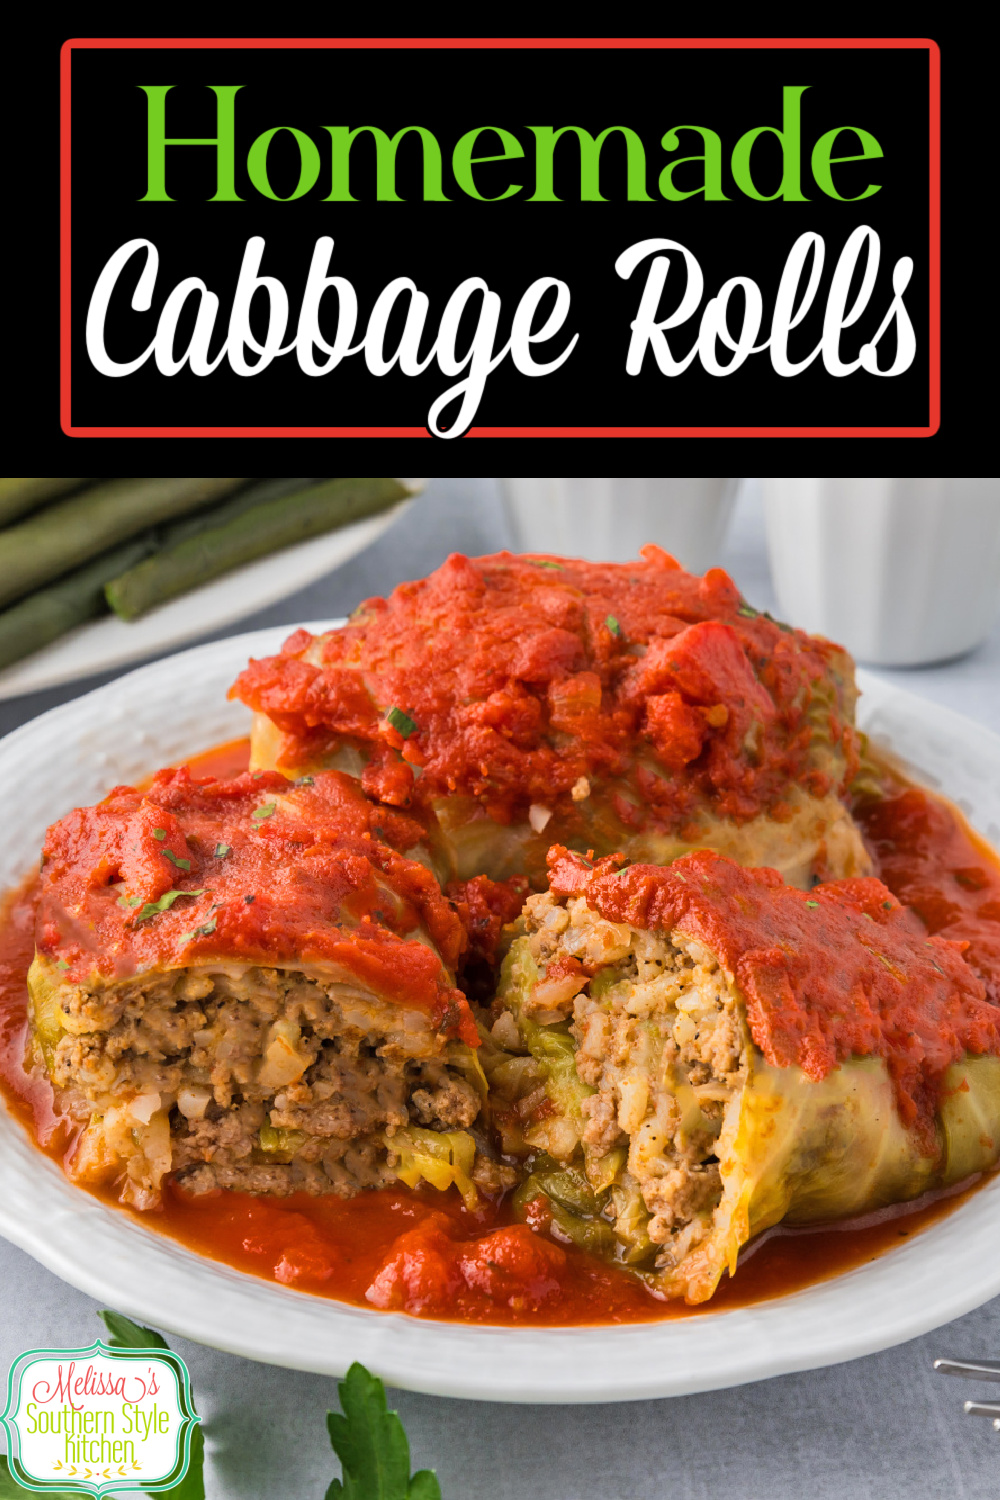 This Cabbage Rolls Recipe is packed with flavor. Serve it with a side of mashed potatoes or buttered rice for a comfort filled meal. #cabbagerolls #lowcarbrecipes #cabbage #easygroundbeefrecipes #cabbagerecipes via @melissasssk